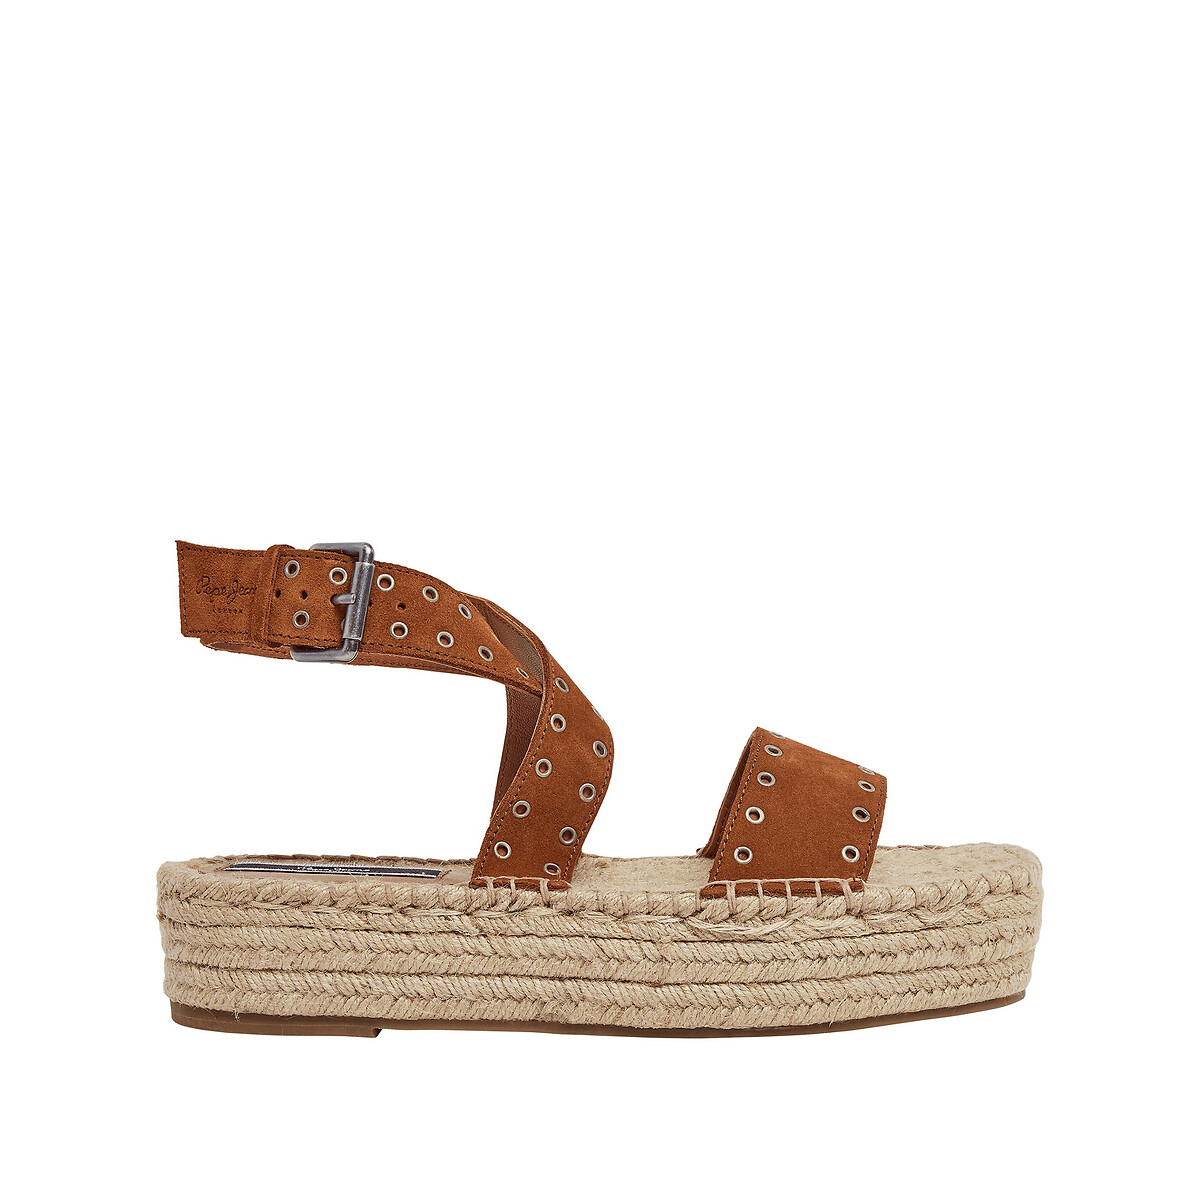 Image of Tracy Antique Wedge Sandals in Suede